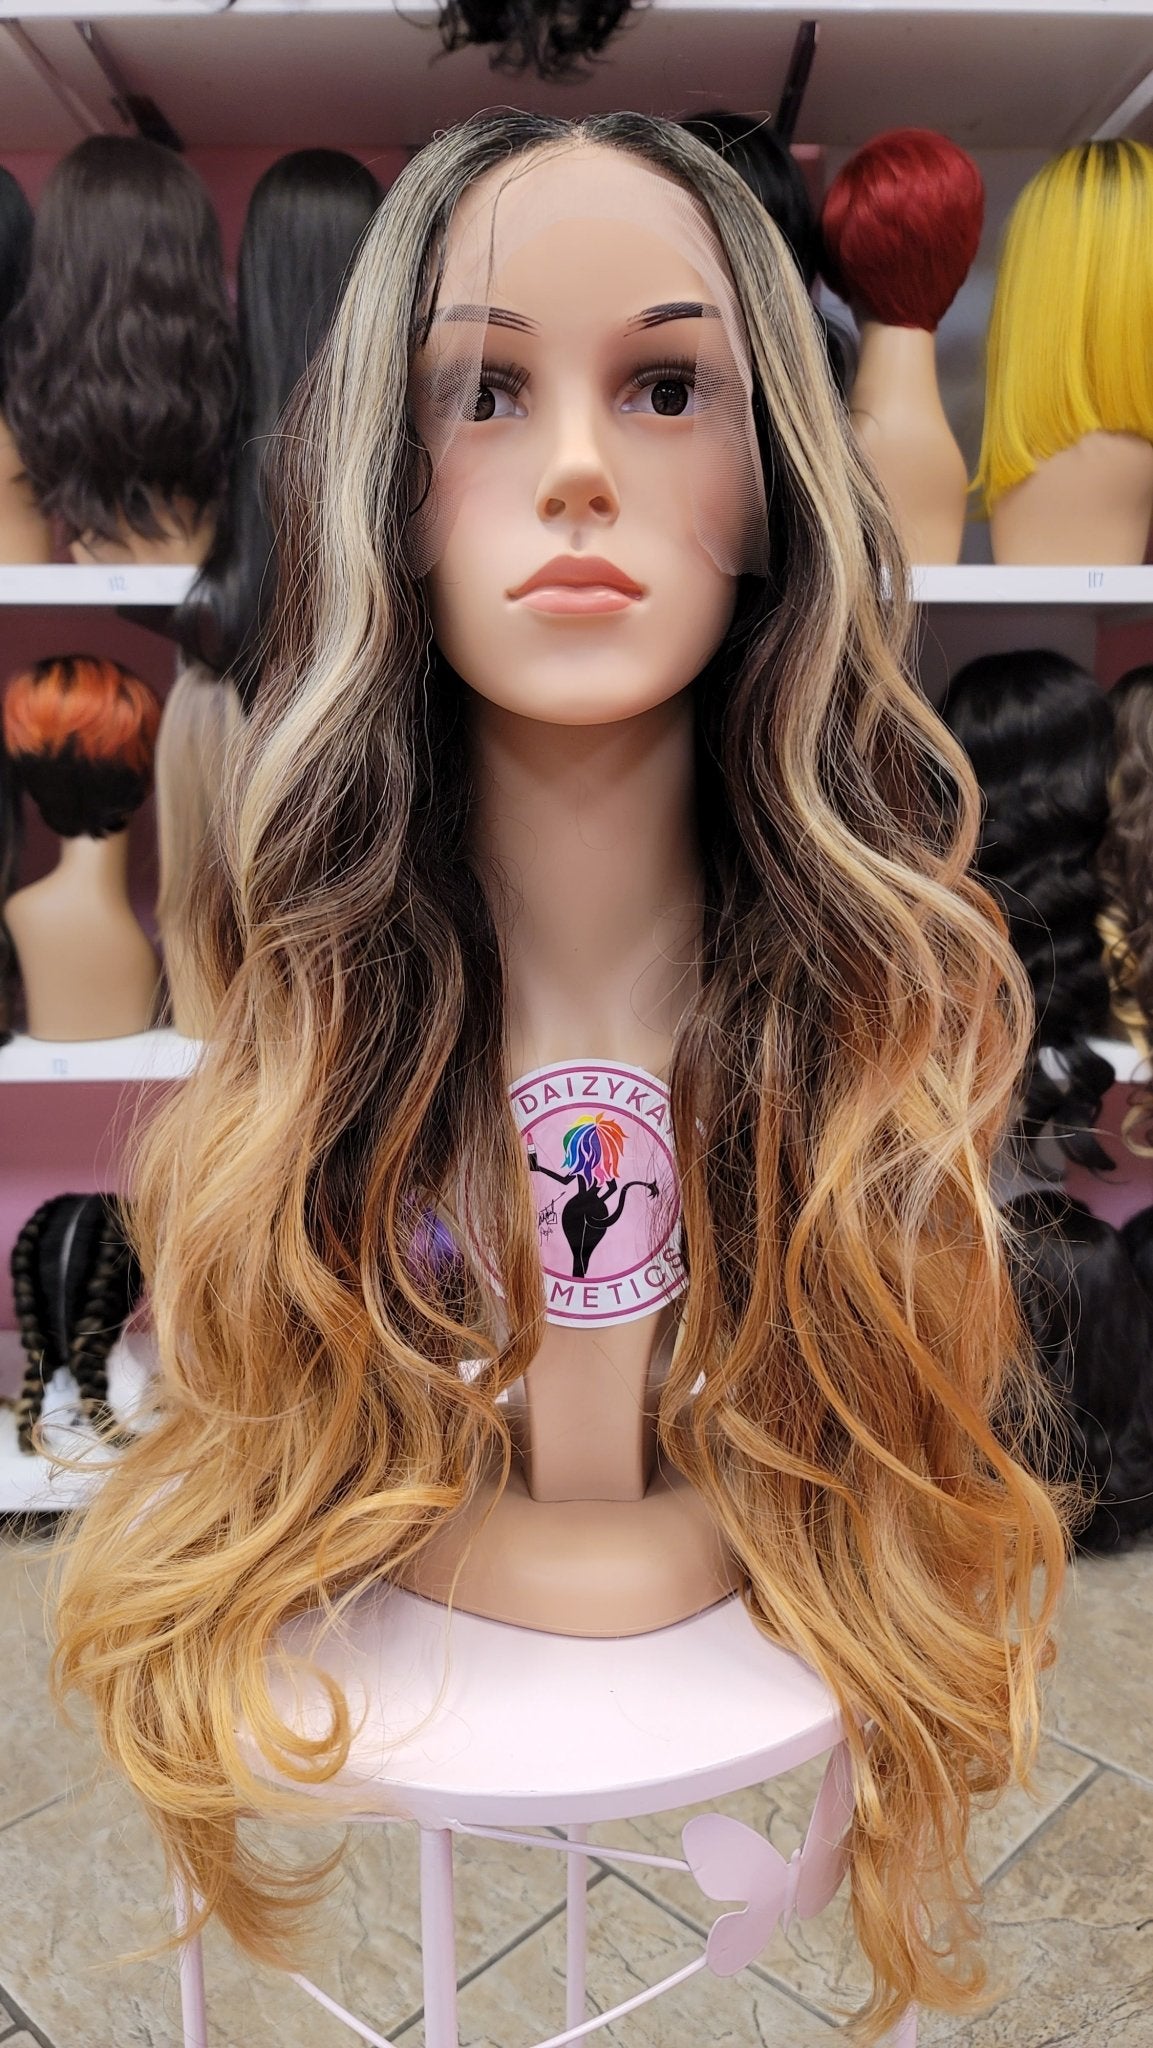 379 Sloan - Middle Part Lace Front Wig - 1B/27/30 - DaizyKat Cosmetics 379 Sloan - Middle Part Lace Front Wig - 1B/27/30 DaizyKat Cosmetics Wigs